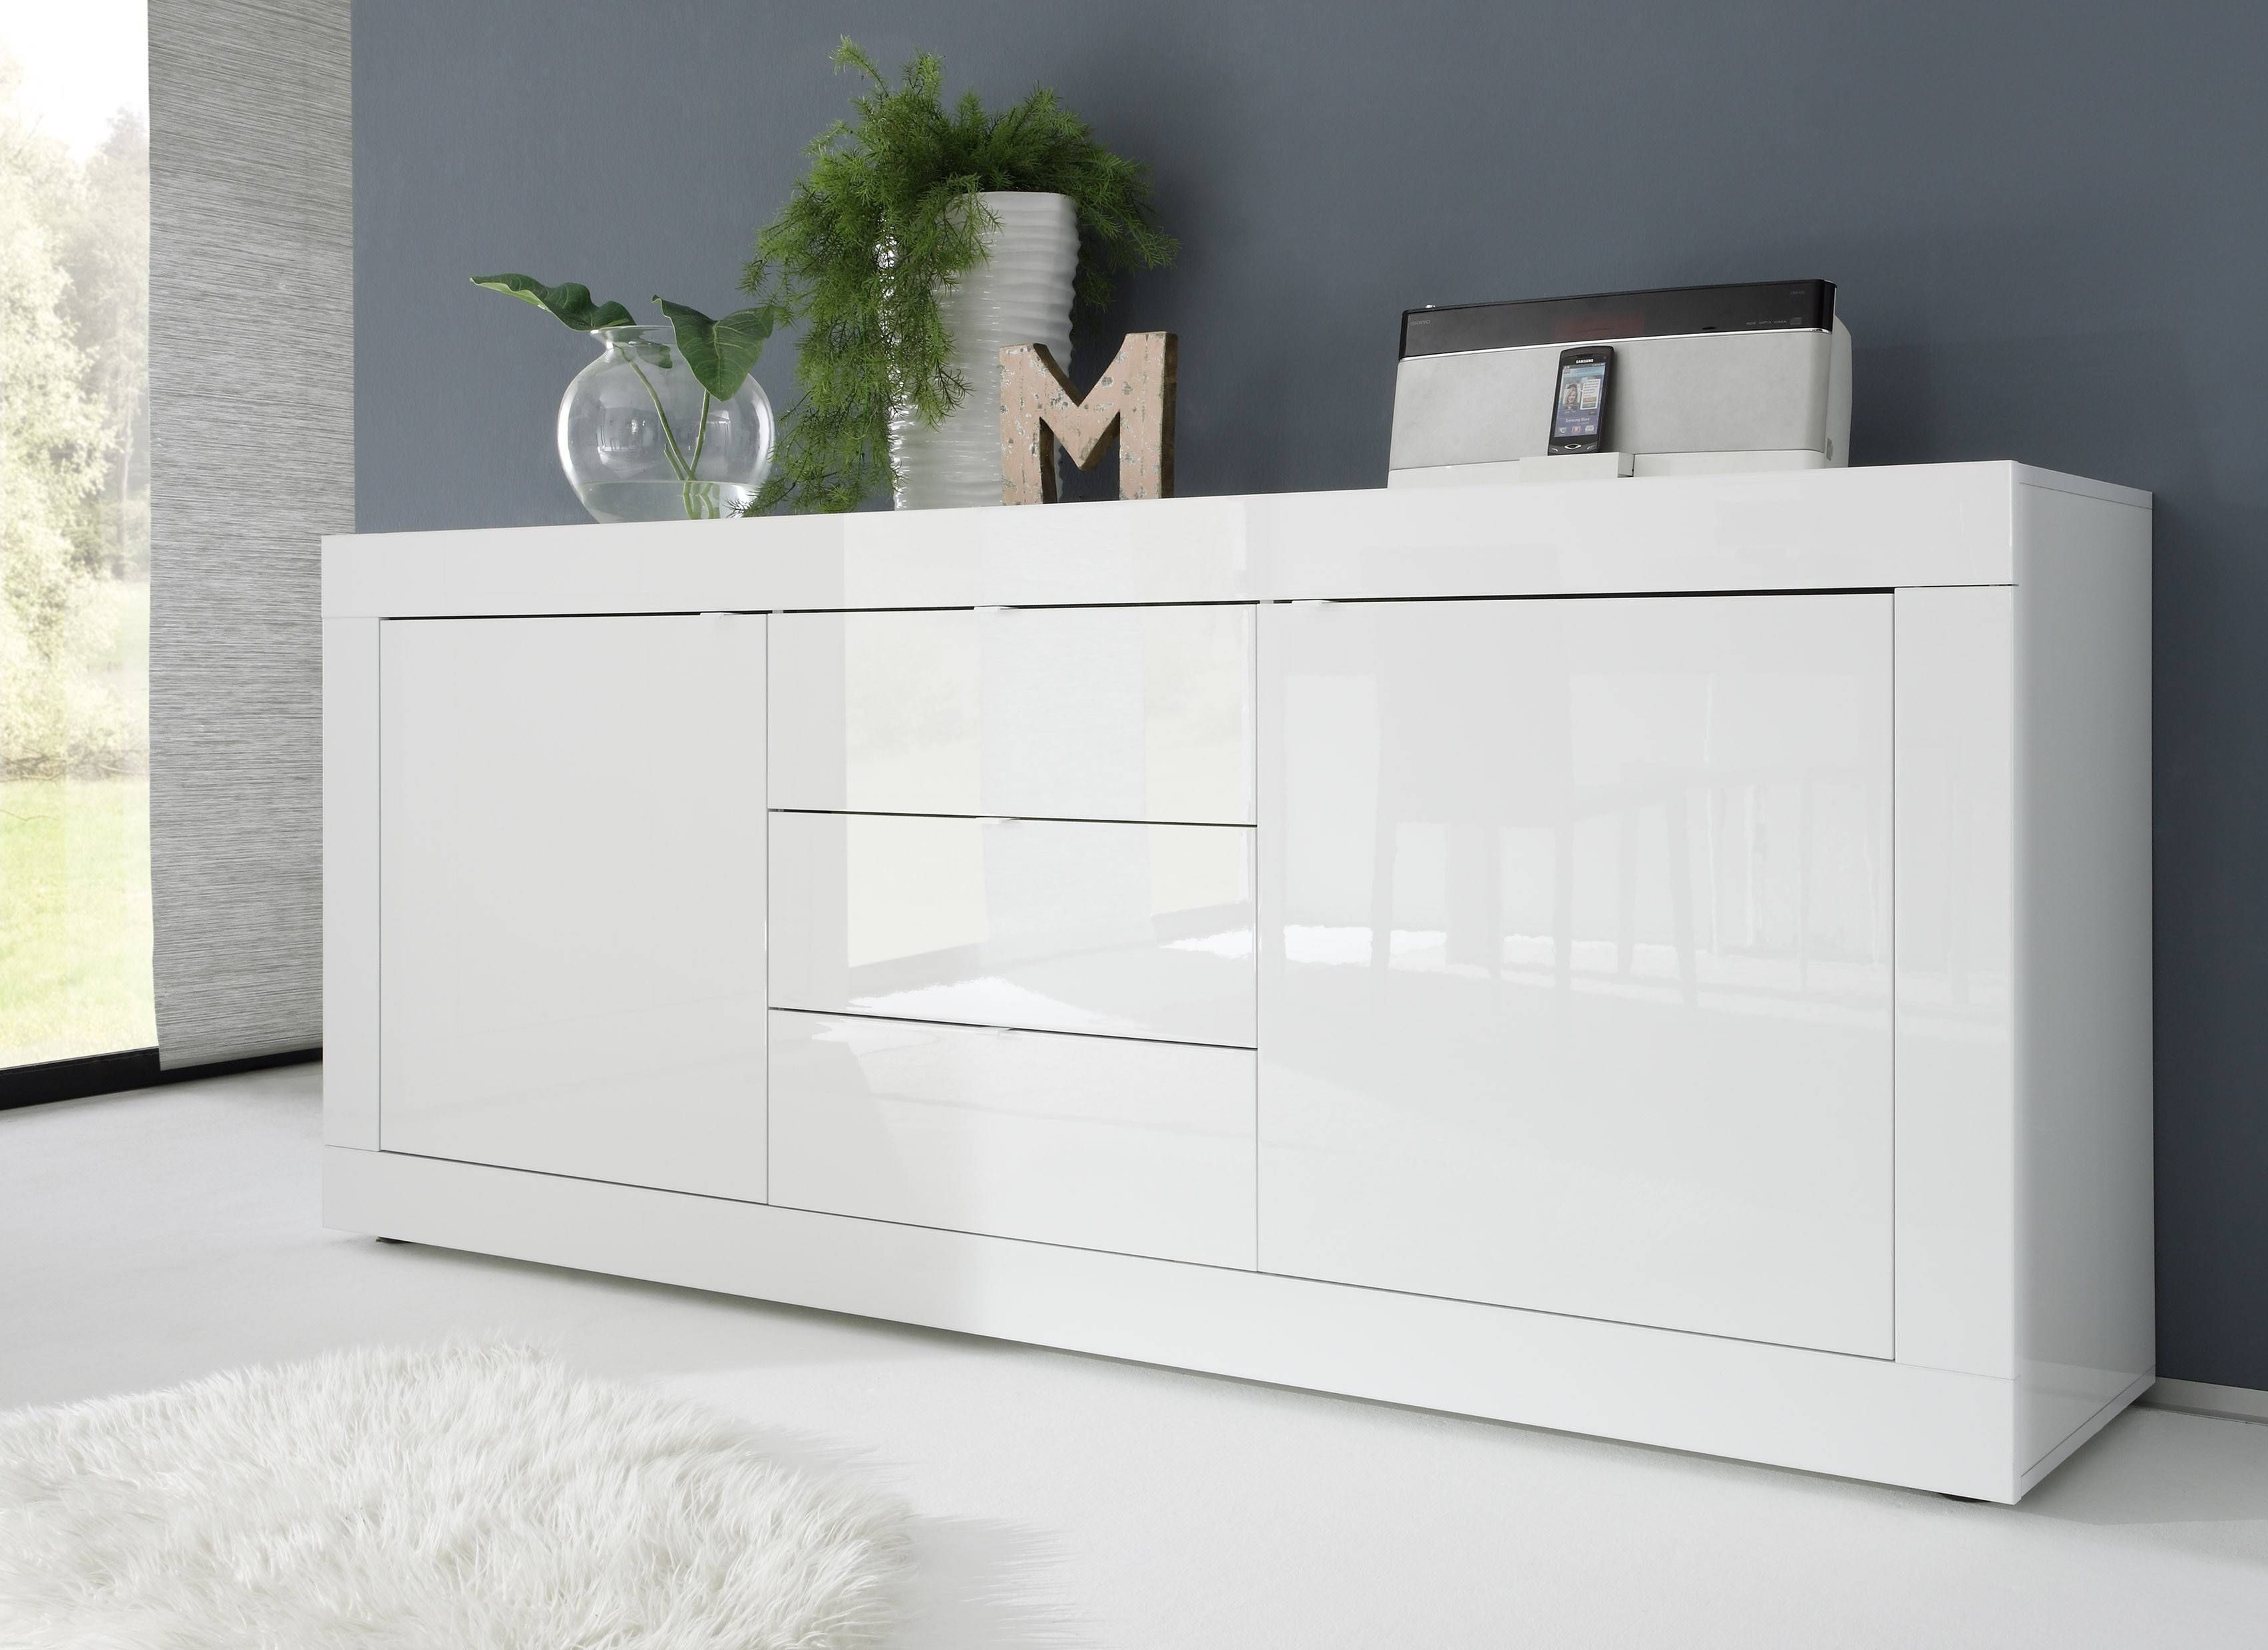 Dining Room Sideboard White. Find This Pin And More On Minimalist Intended For Contemporary White Sideboard (Photo 4 of 20)